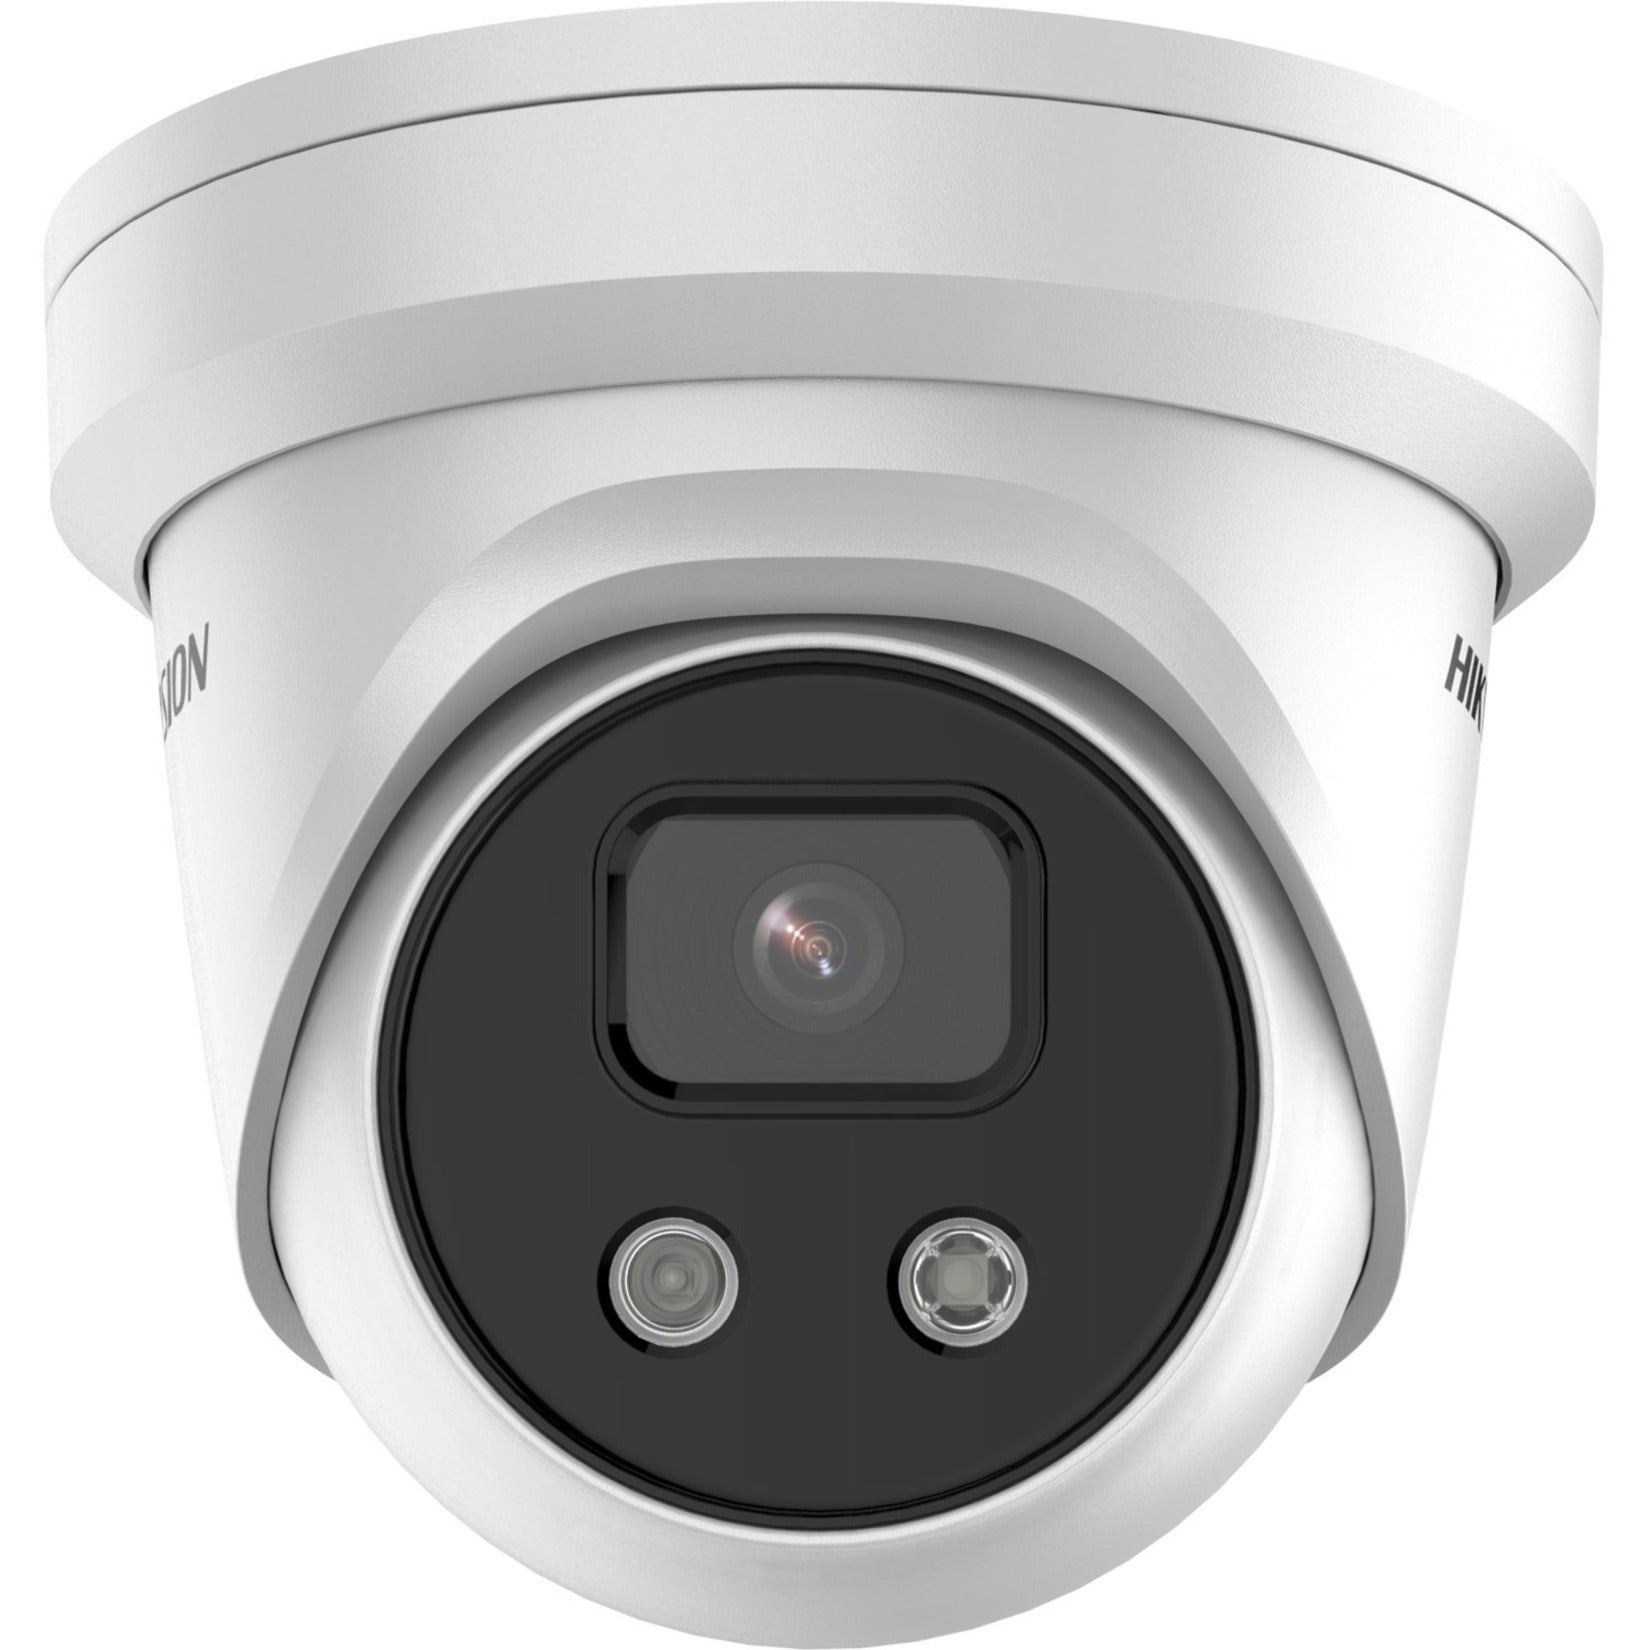 Hikvision PCI-T15F4S AcuSense 5 MP IR Fixed Turret Network Camera, 5MP, WDR, POE/12